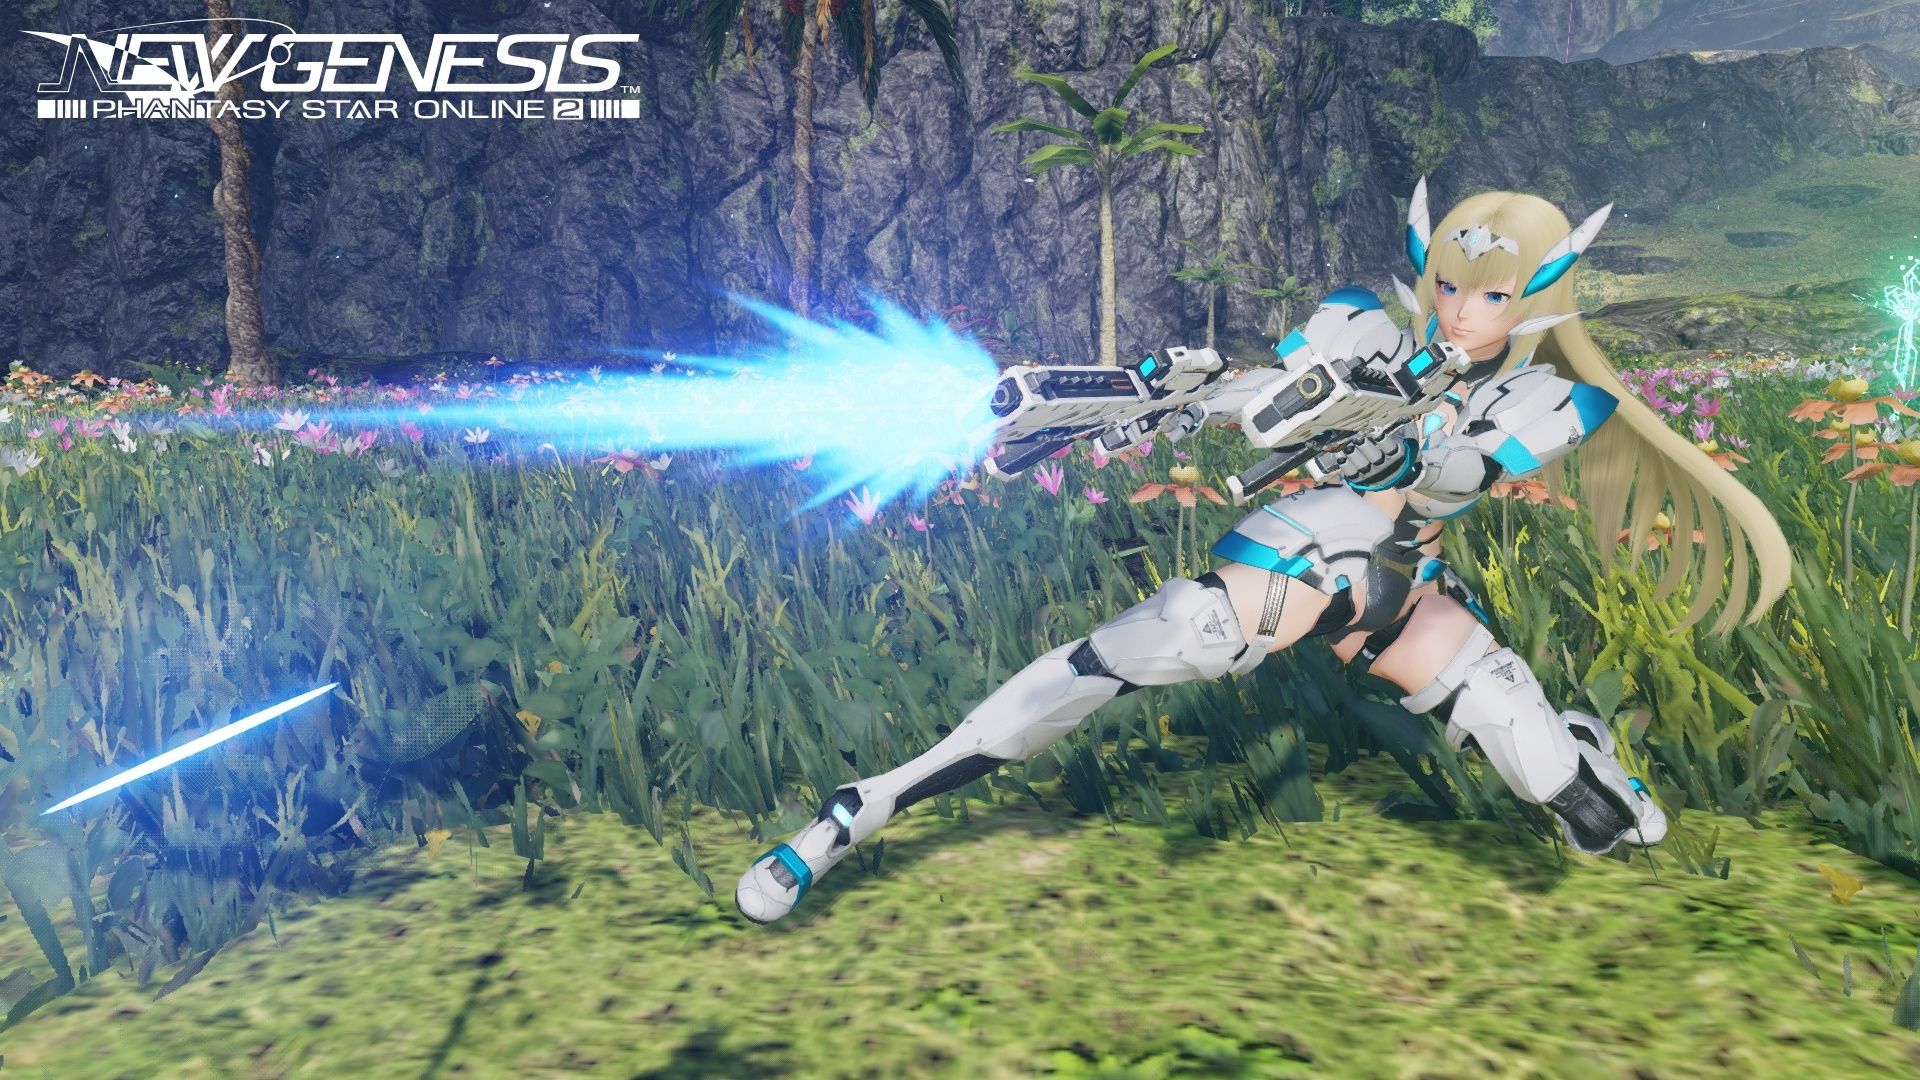 Phantasy Star Online 2: New Genesis announces official global launch has started